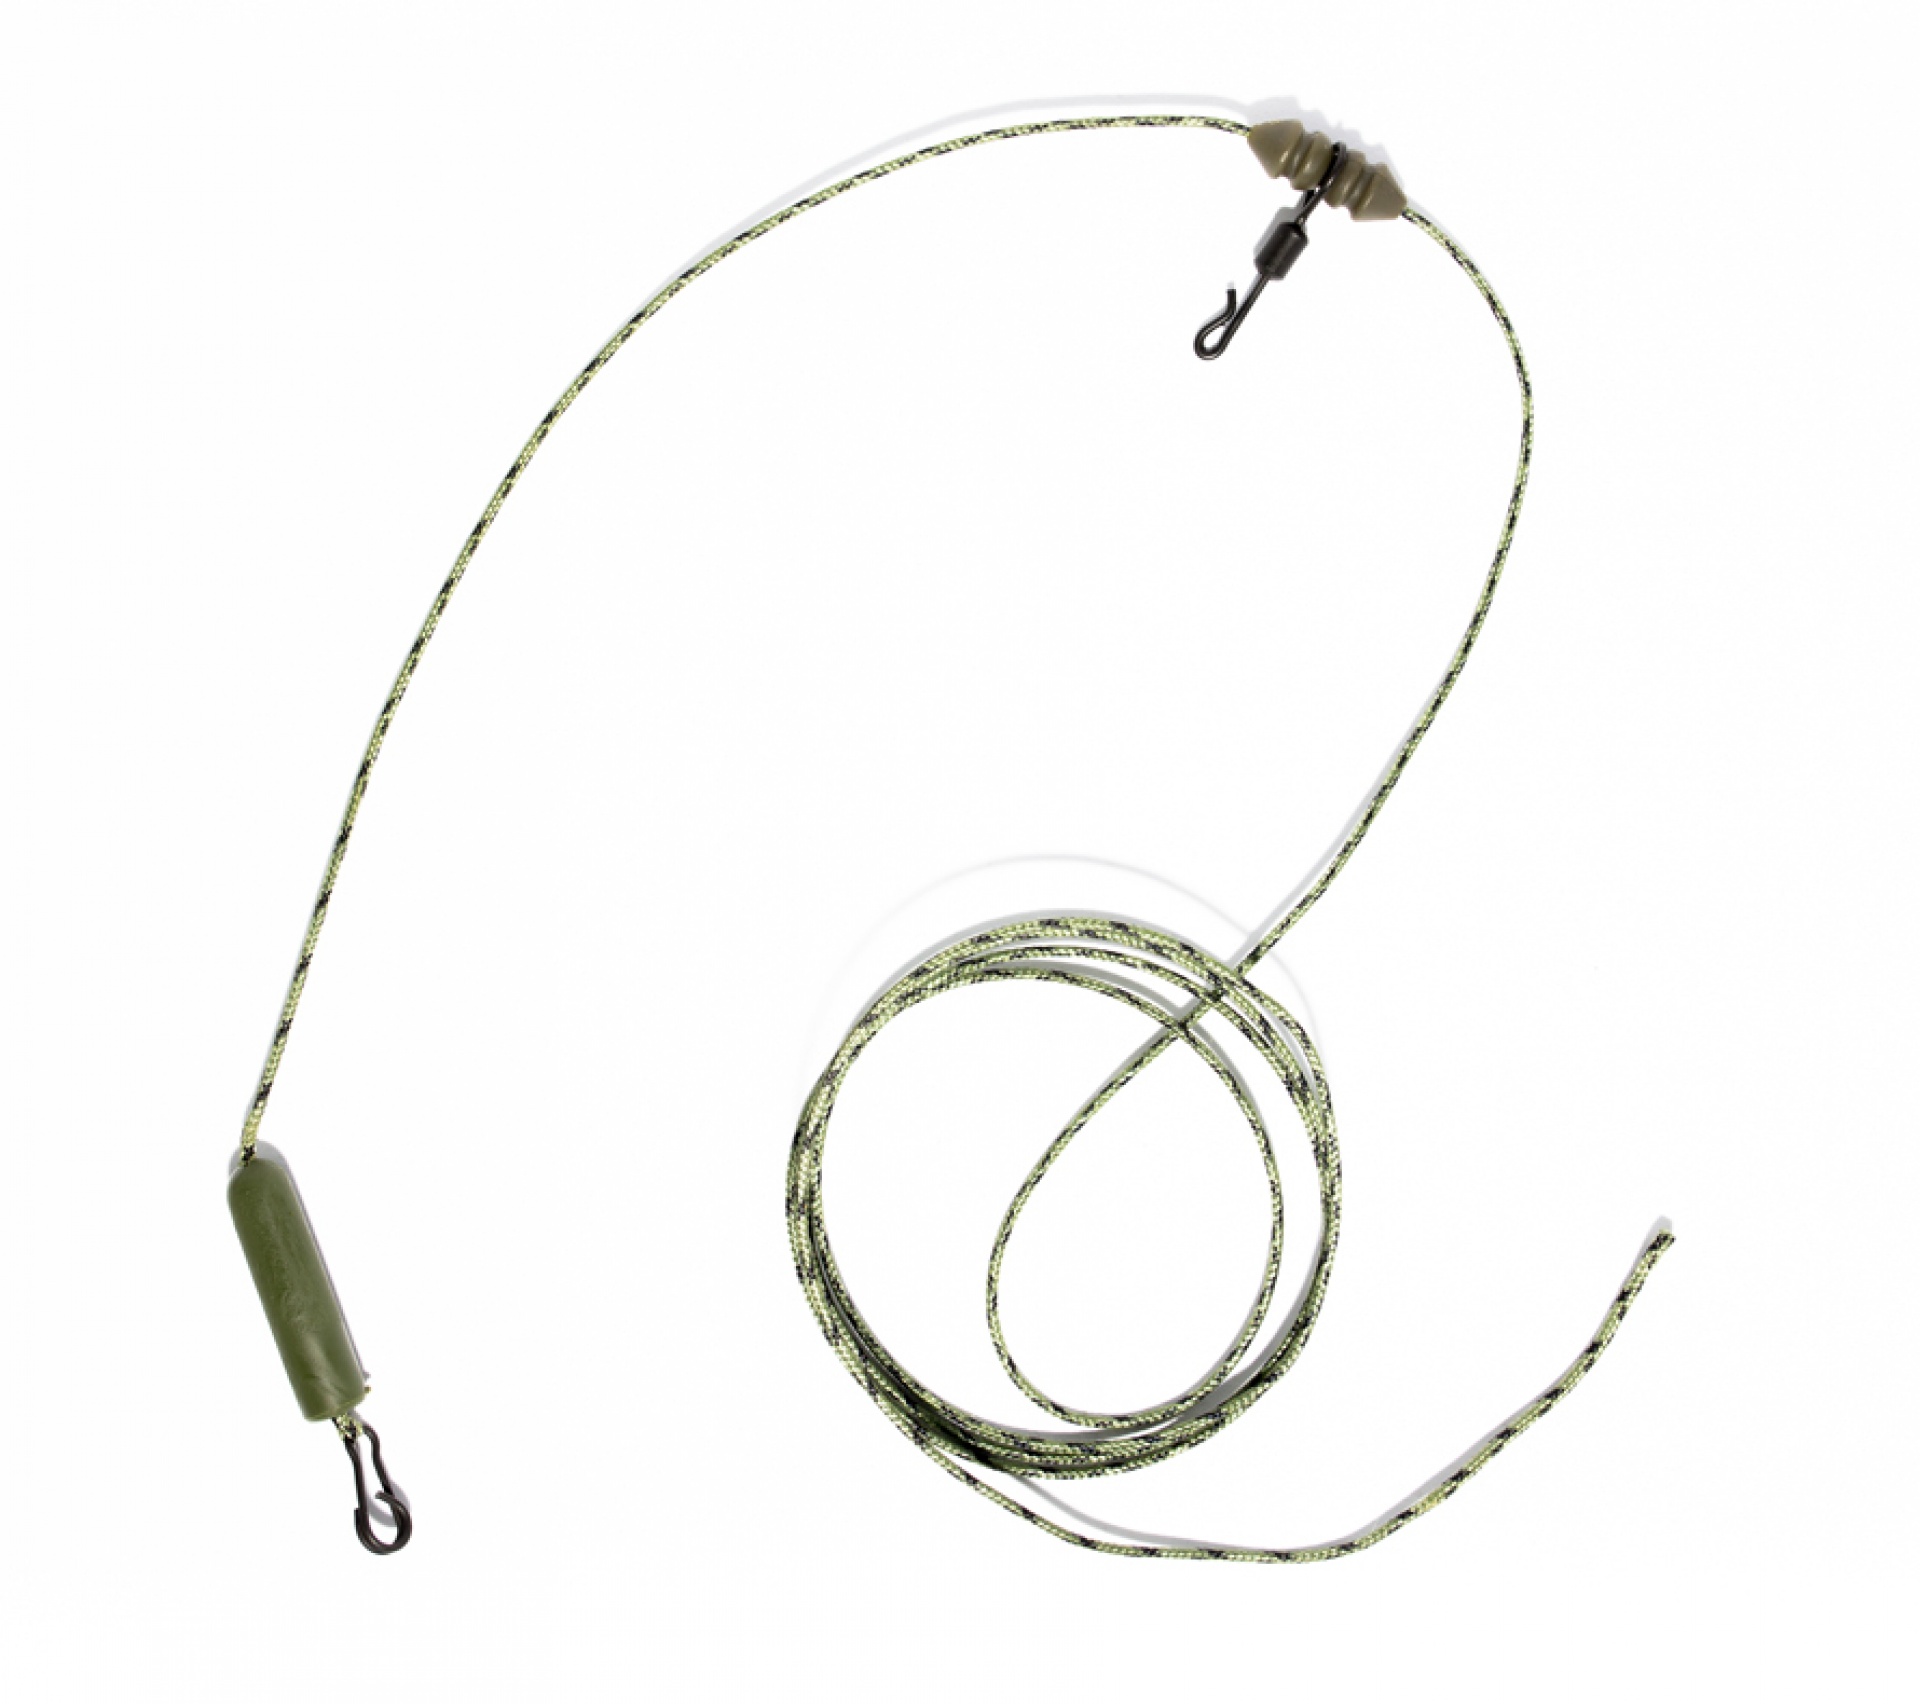 UnderCarp - Complete Carp Chod Rig Set with 45 lbs Leadcore